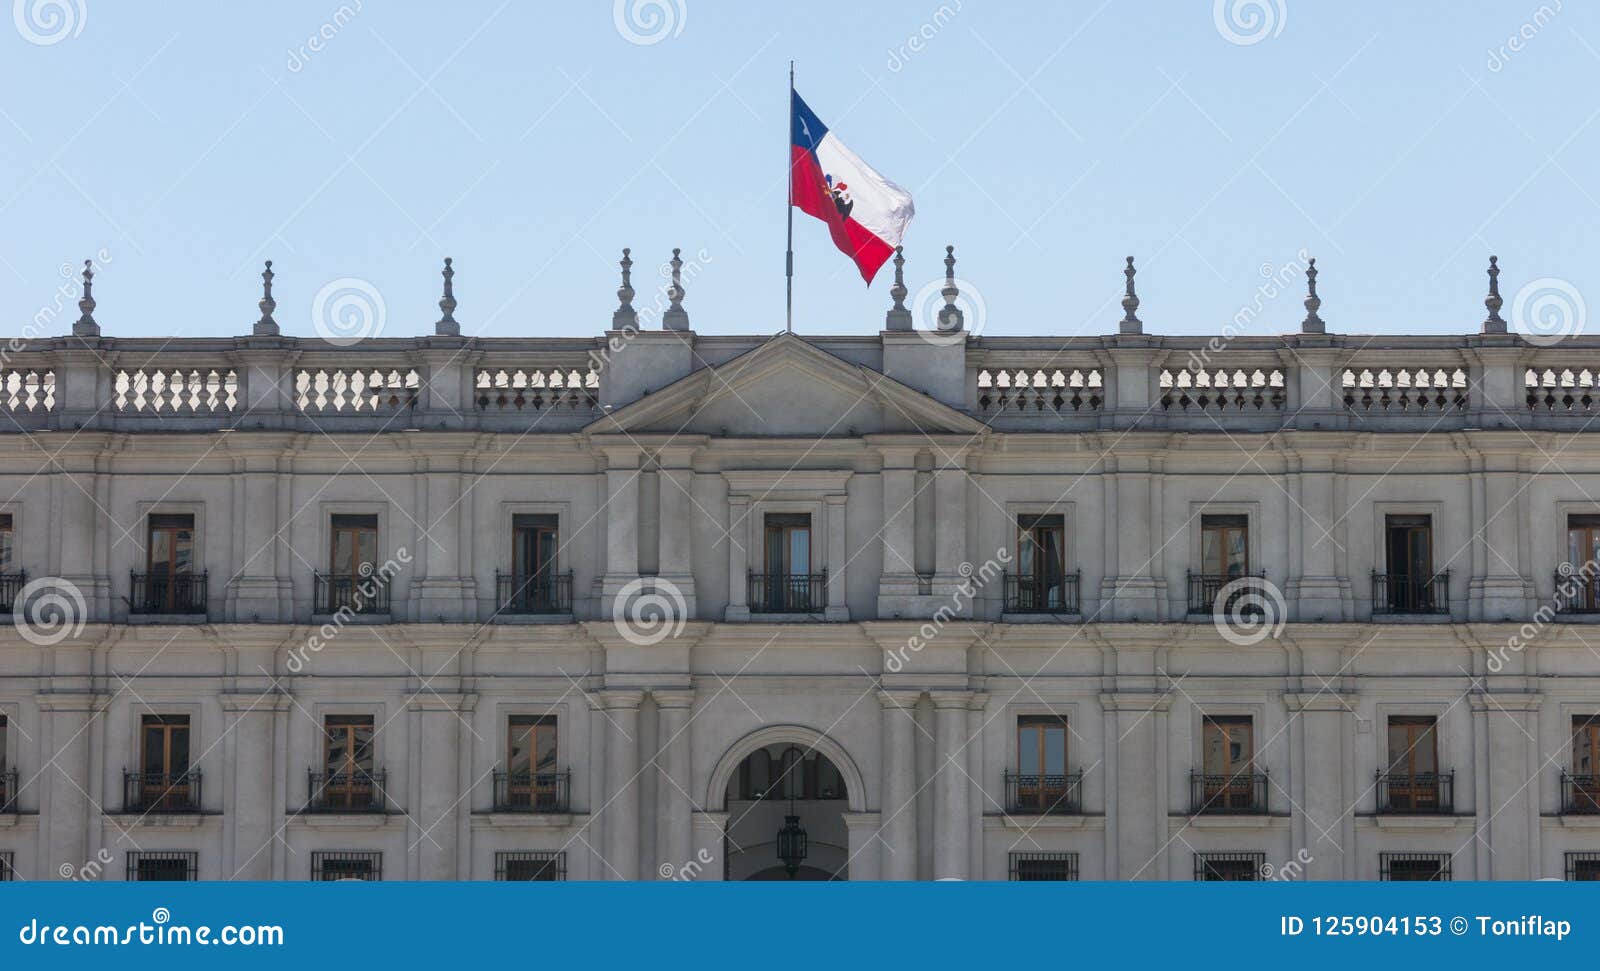 view of the presidential palace, known as la moneda, in santiago